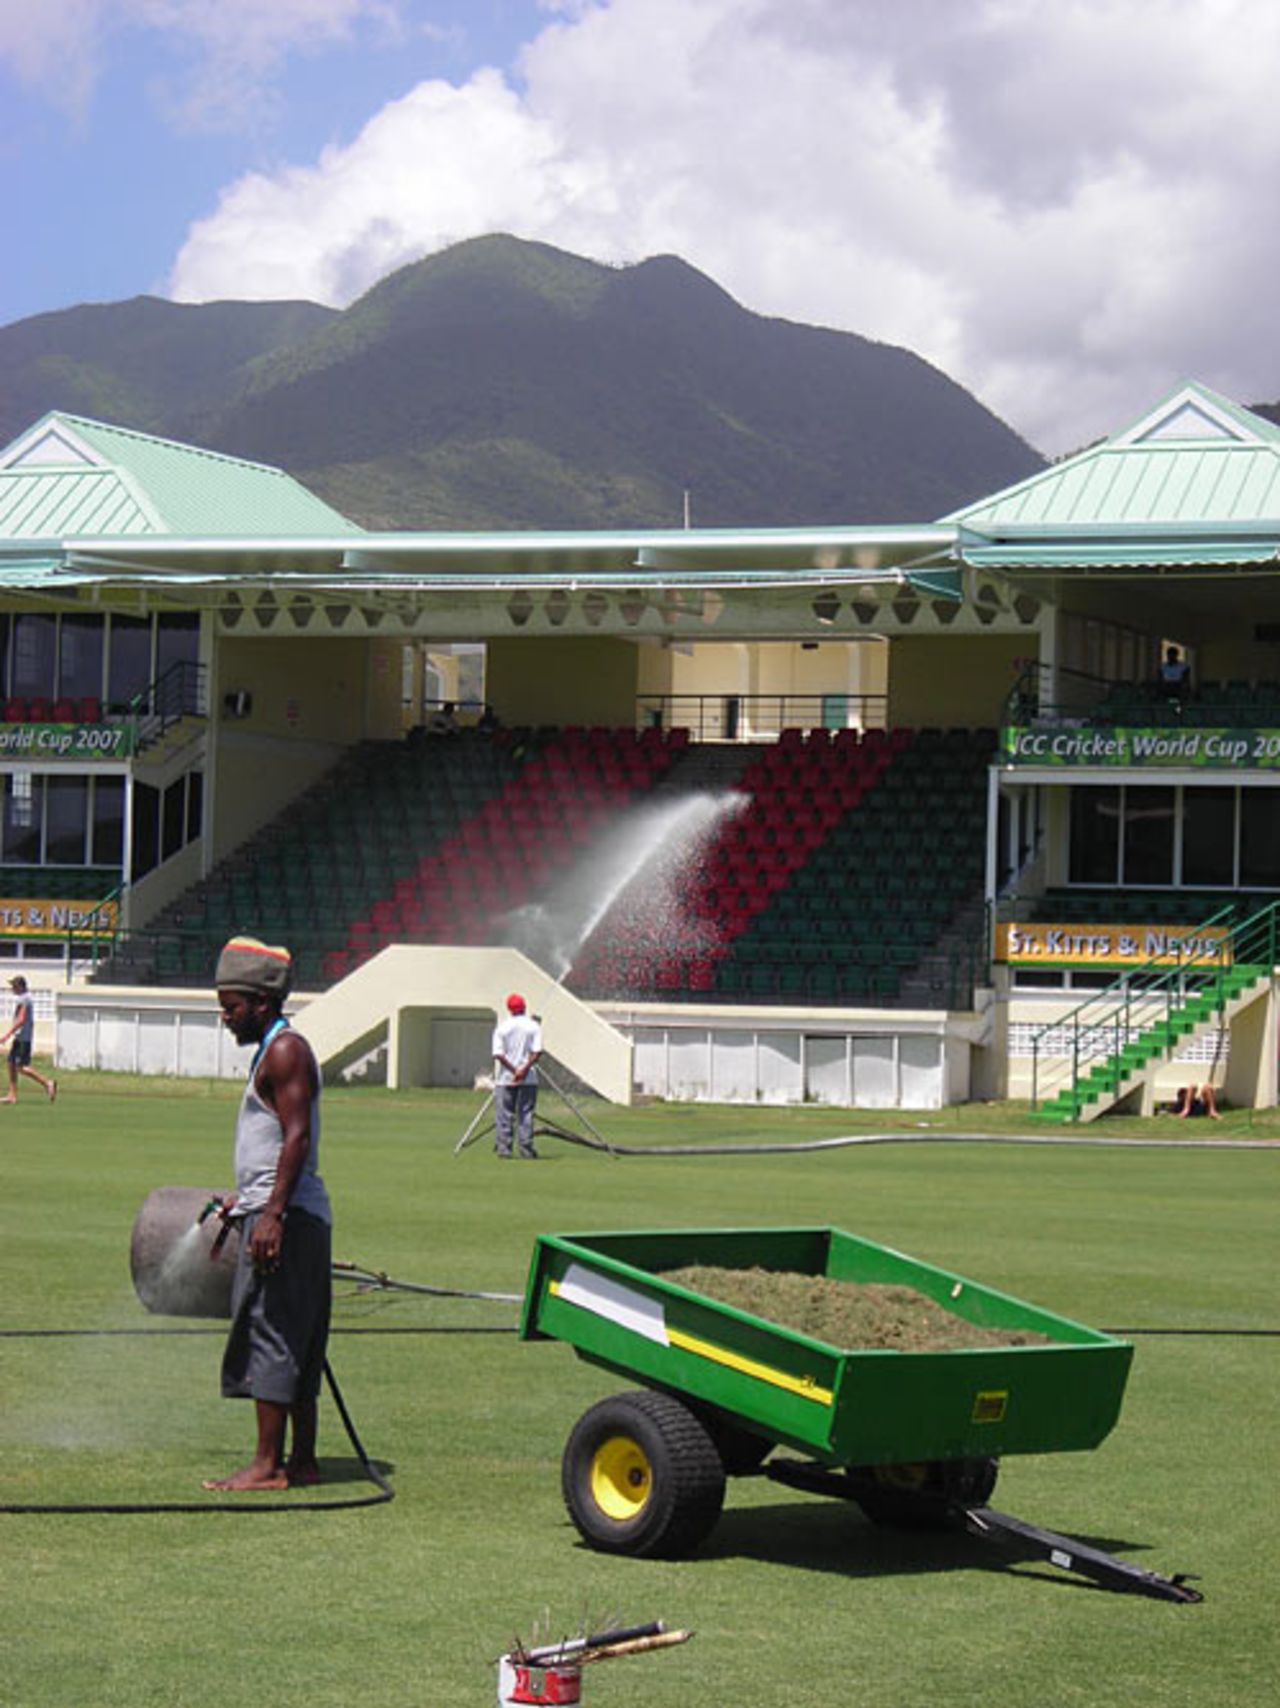 Ground staff water the outfield at Warner Park, 2007 World Cup, Basseterre, St Kitts, March 11, 2007